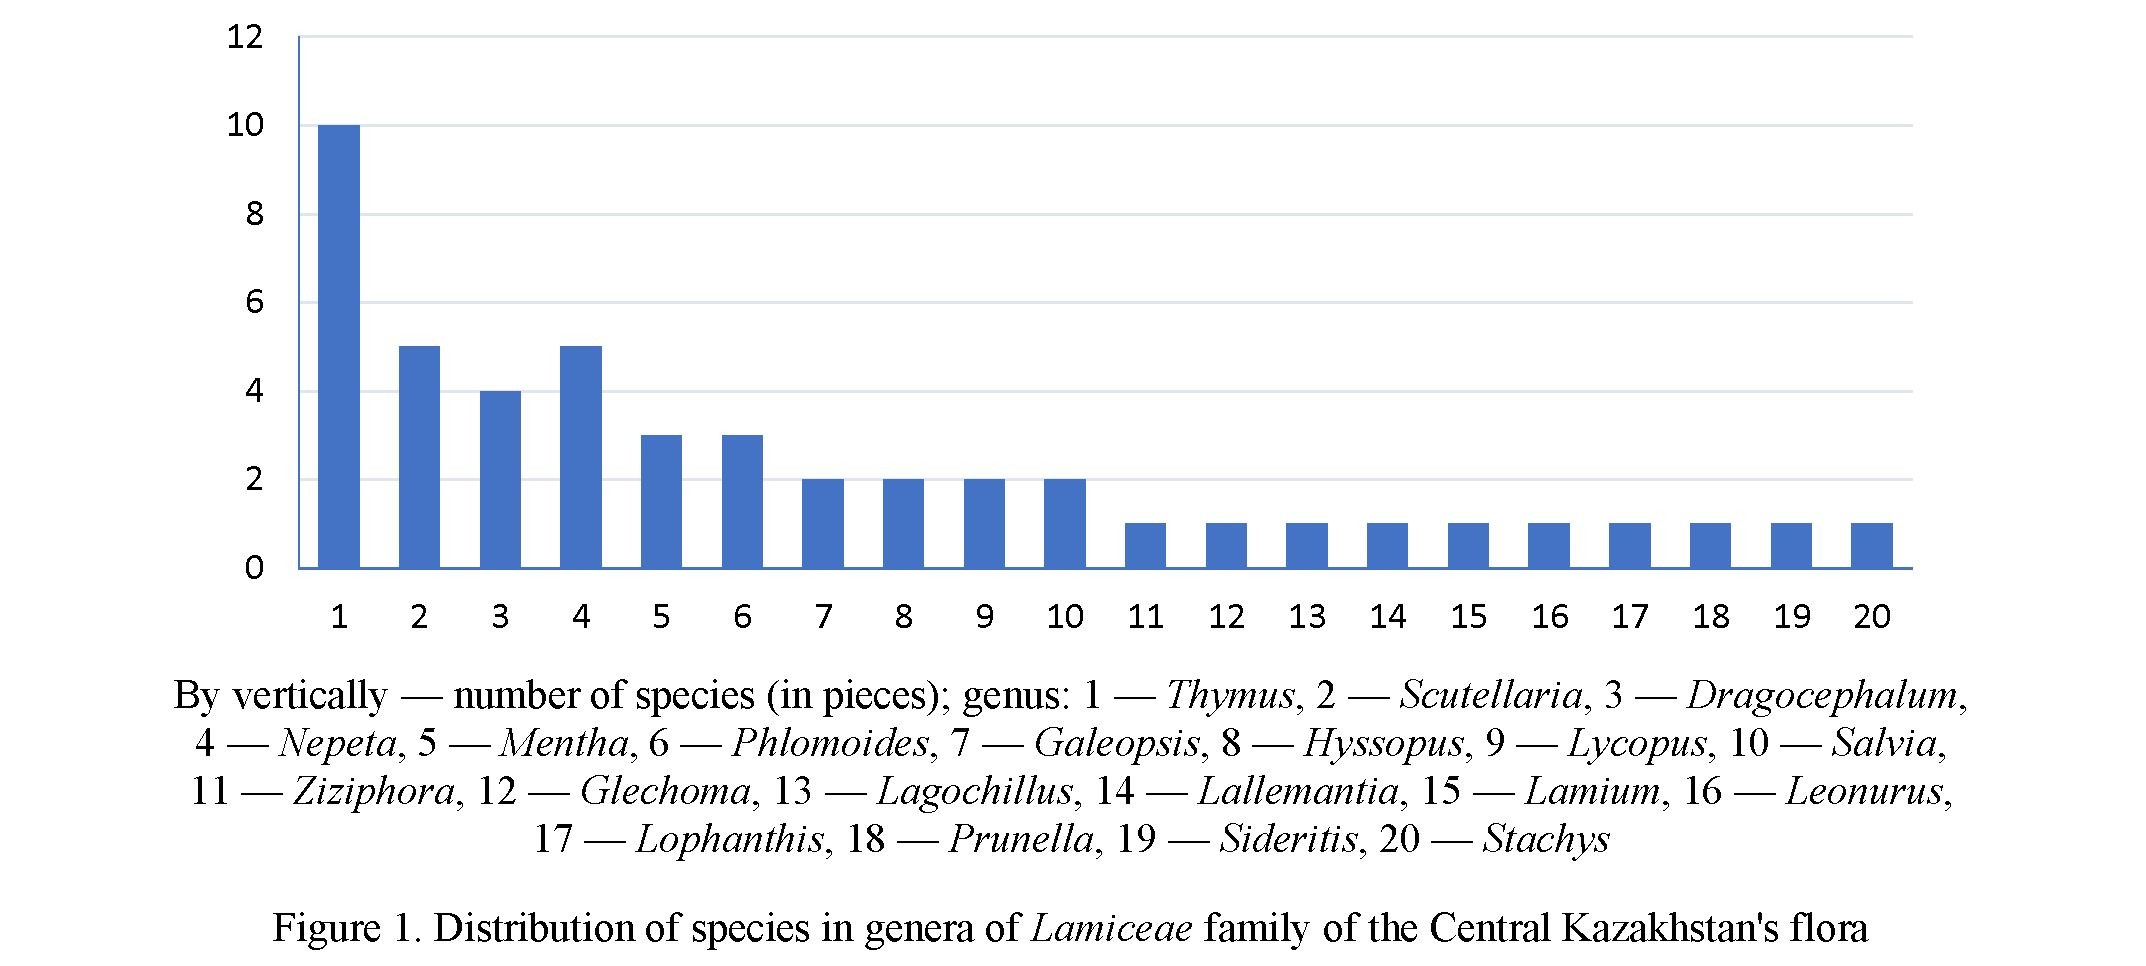 Analysis of representatives of Lamiaceae family in the flora of the Central Kazakhstan